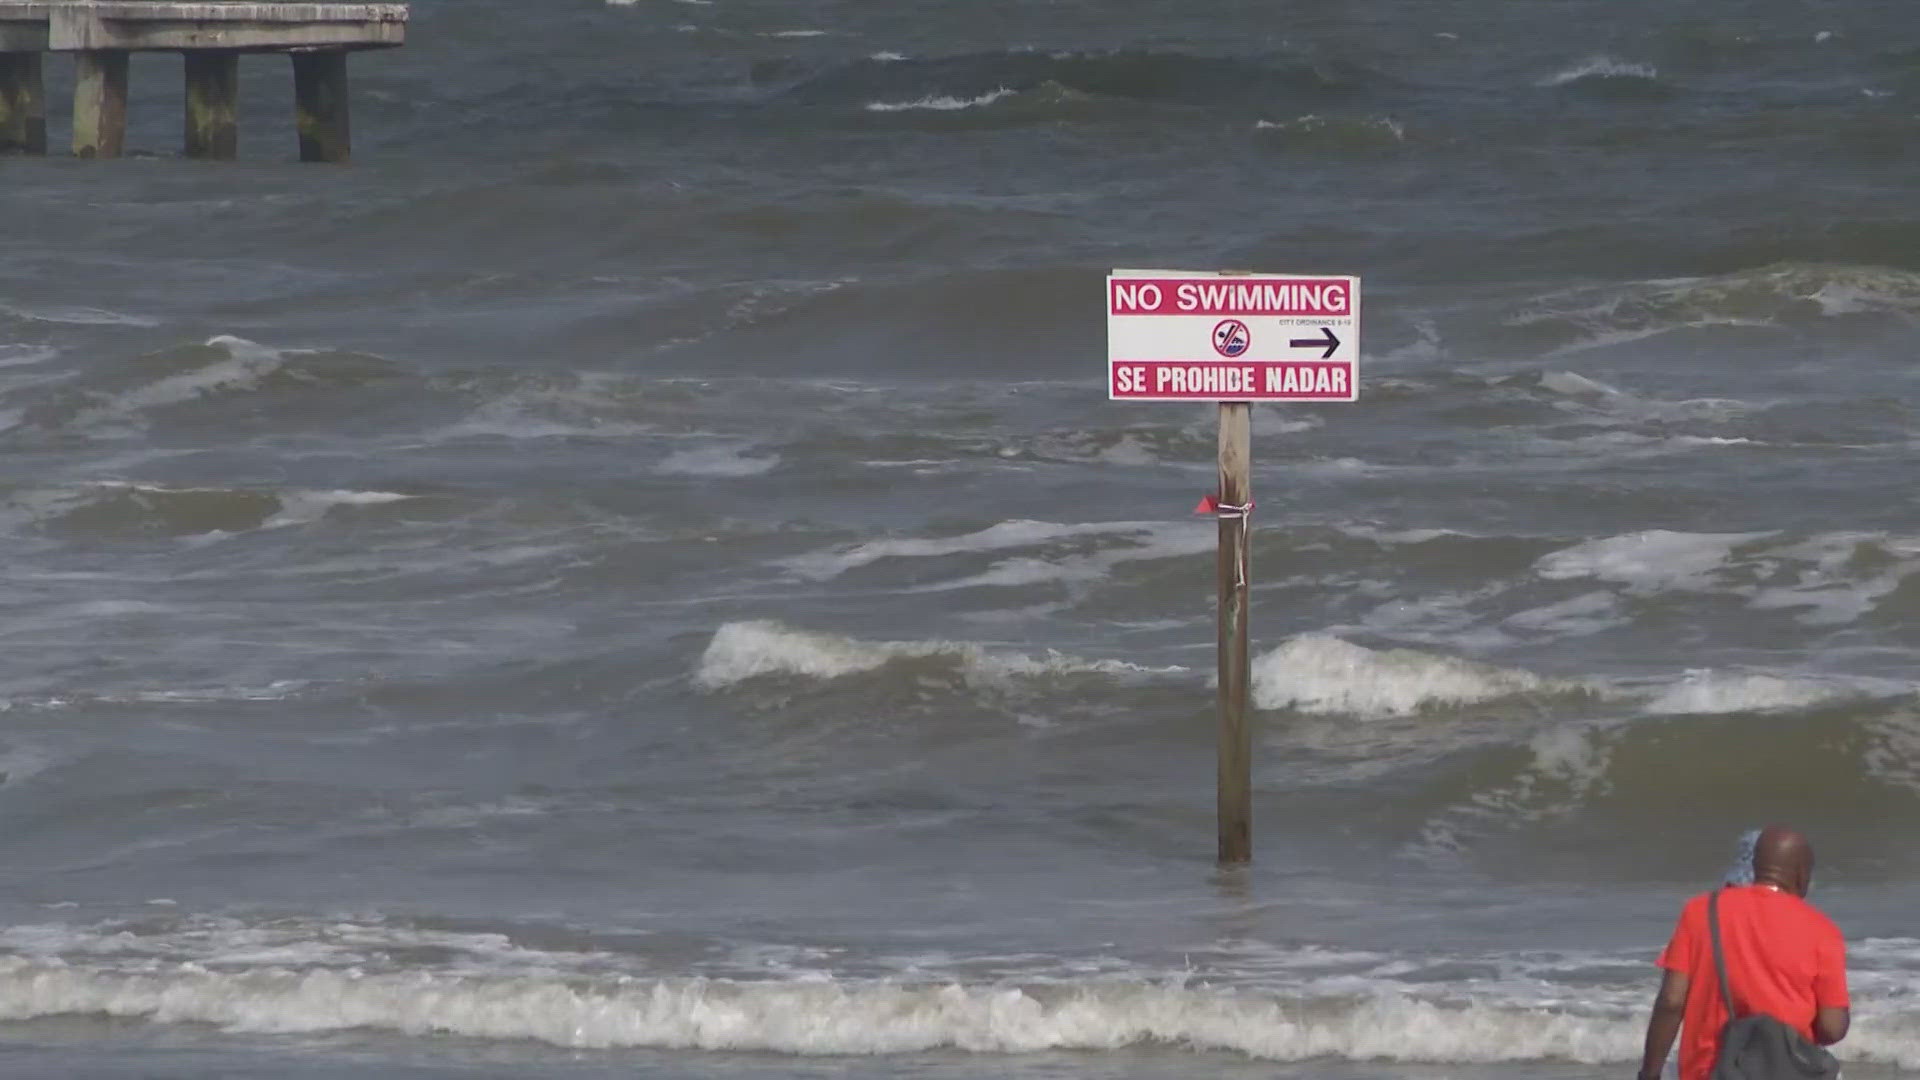 Swimmer dies after getting caught in rip current in Galveston